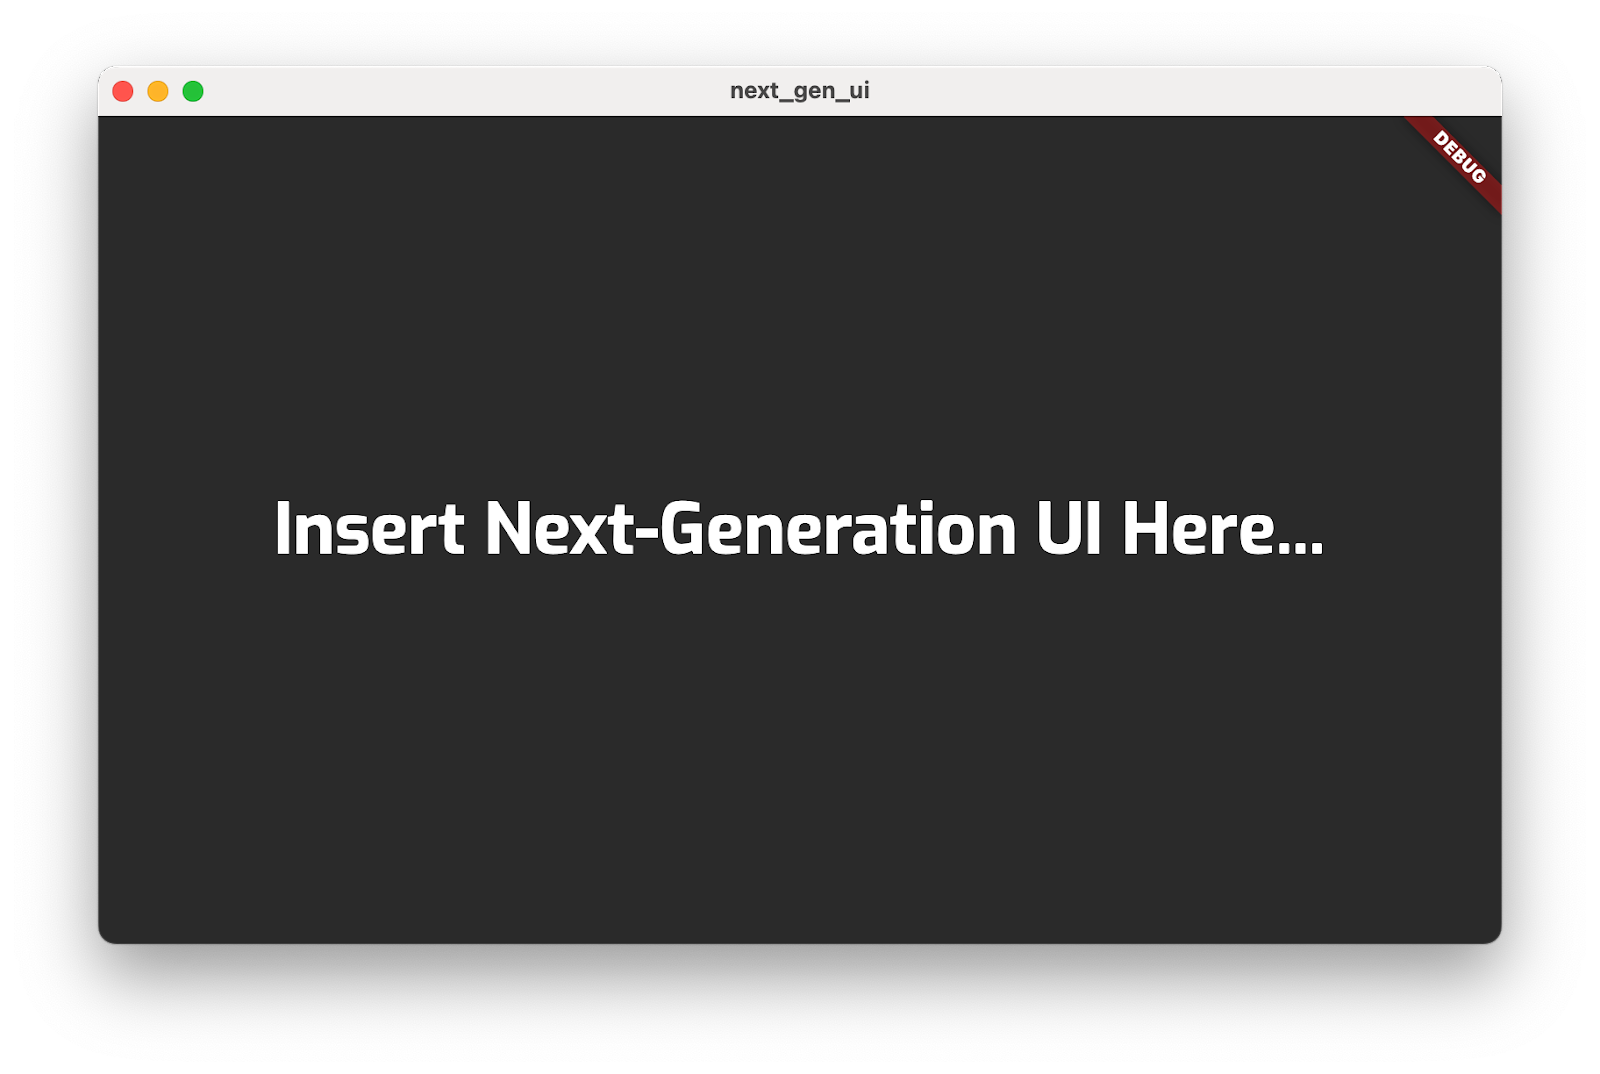 The codelab app running with the title 'Insert Next-Generation UI Here...'